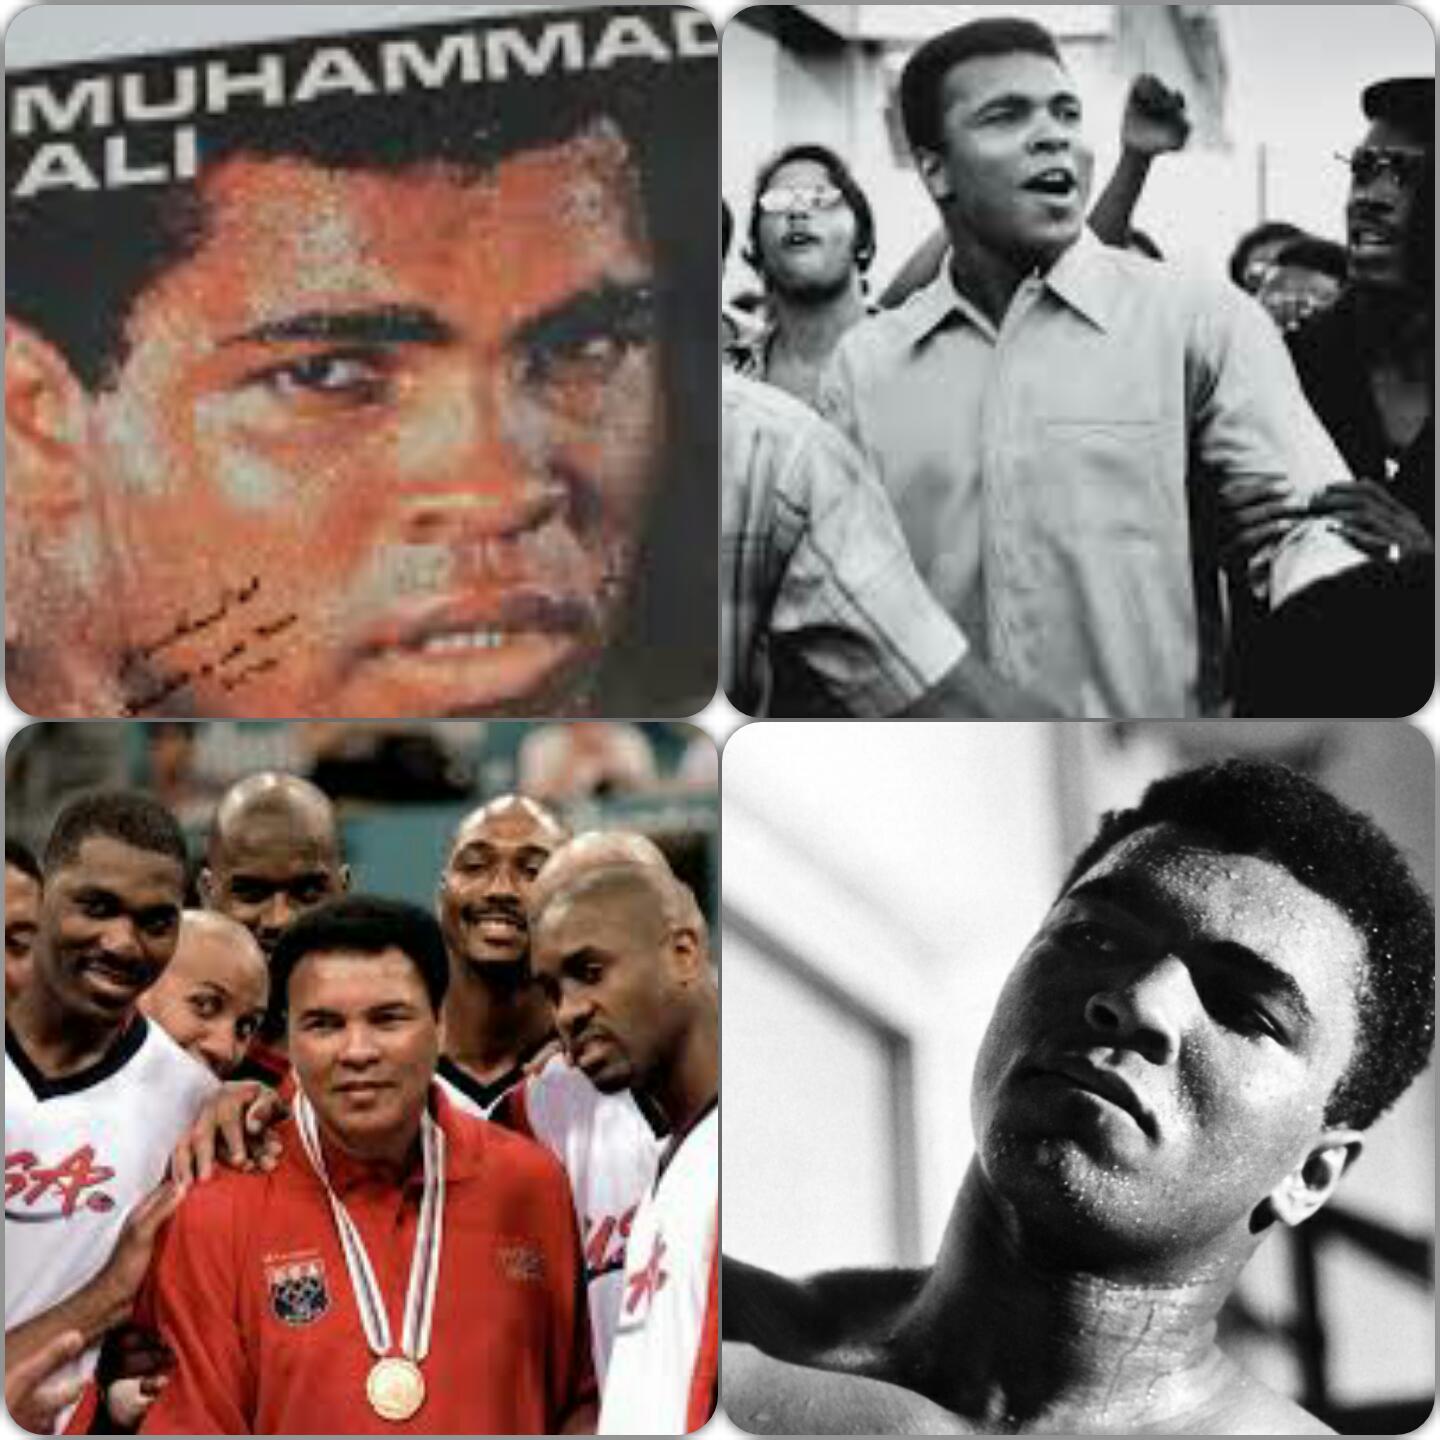 Facts about muhammad ali